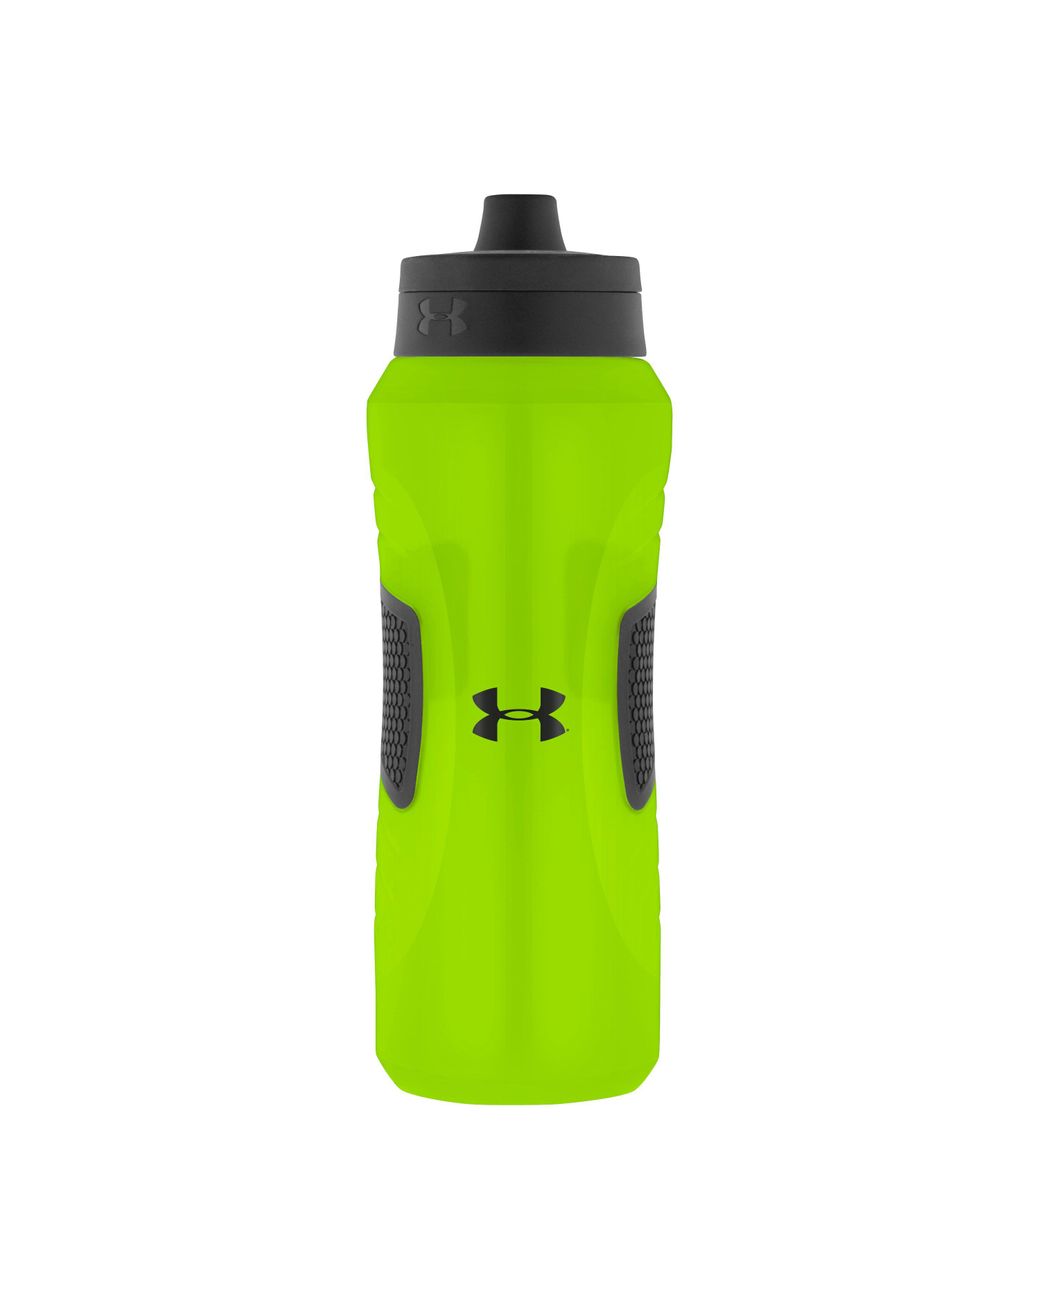 https://cdna.lystit.com/1040/1300/n/photos/underarmour/4bc327ed/under-armour-HYPER-GREEN-Undeniable-32-Oz-Squeezable-Water-Bottle-With-Quick-Shot-Lid.jpeg